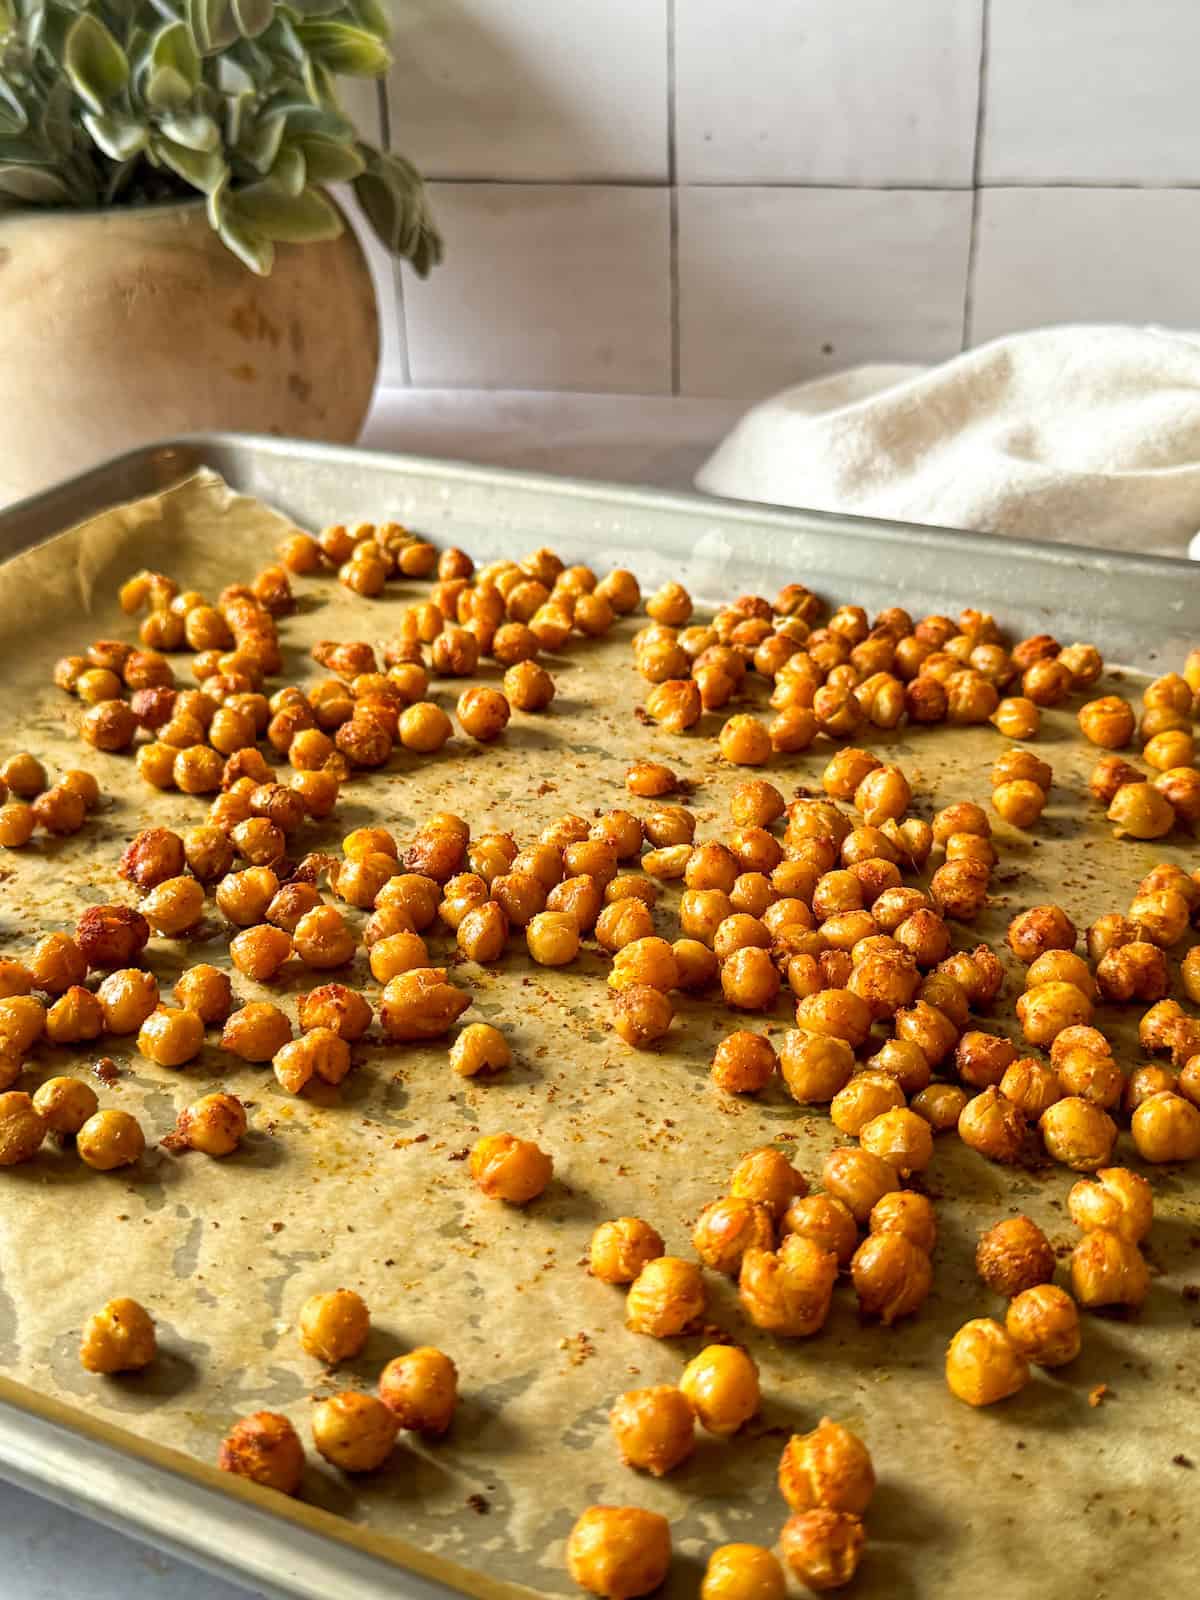 Roasted chickpeas fresh out of the oven on a baking sheet.